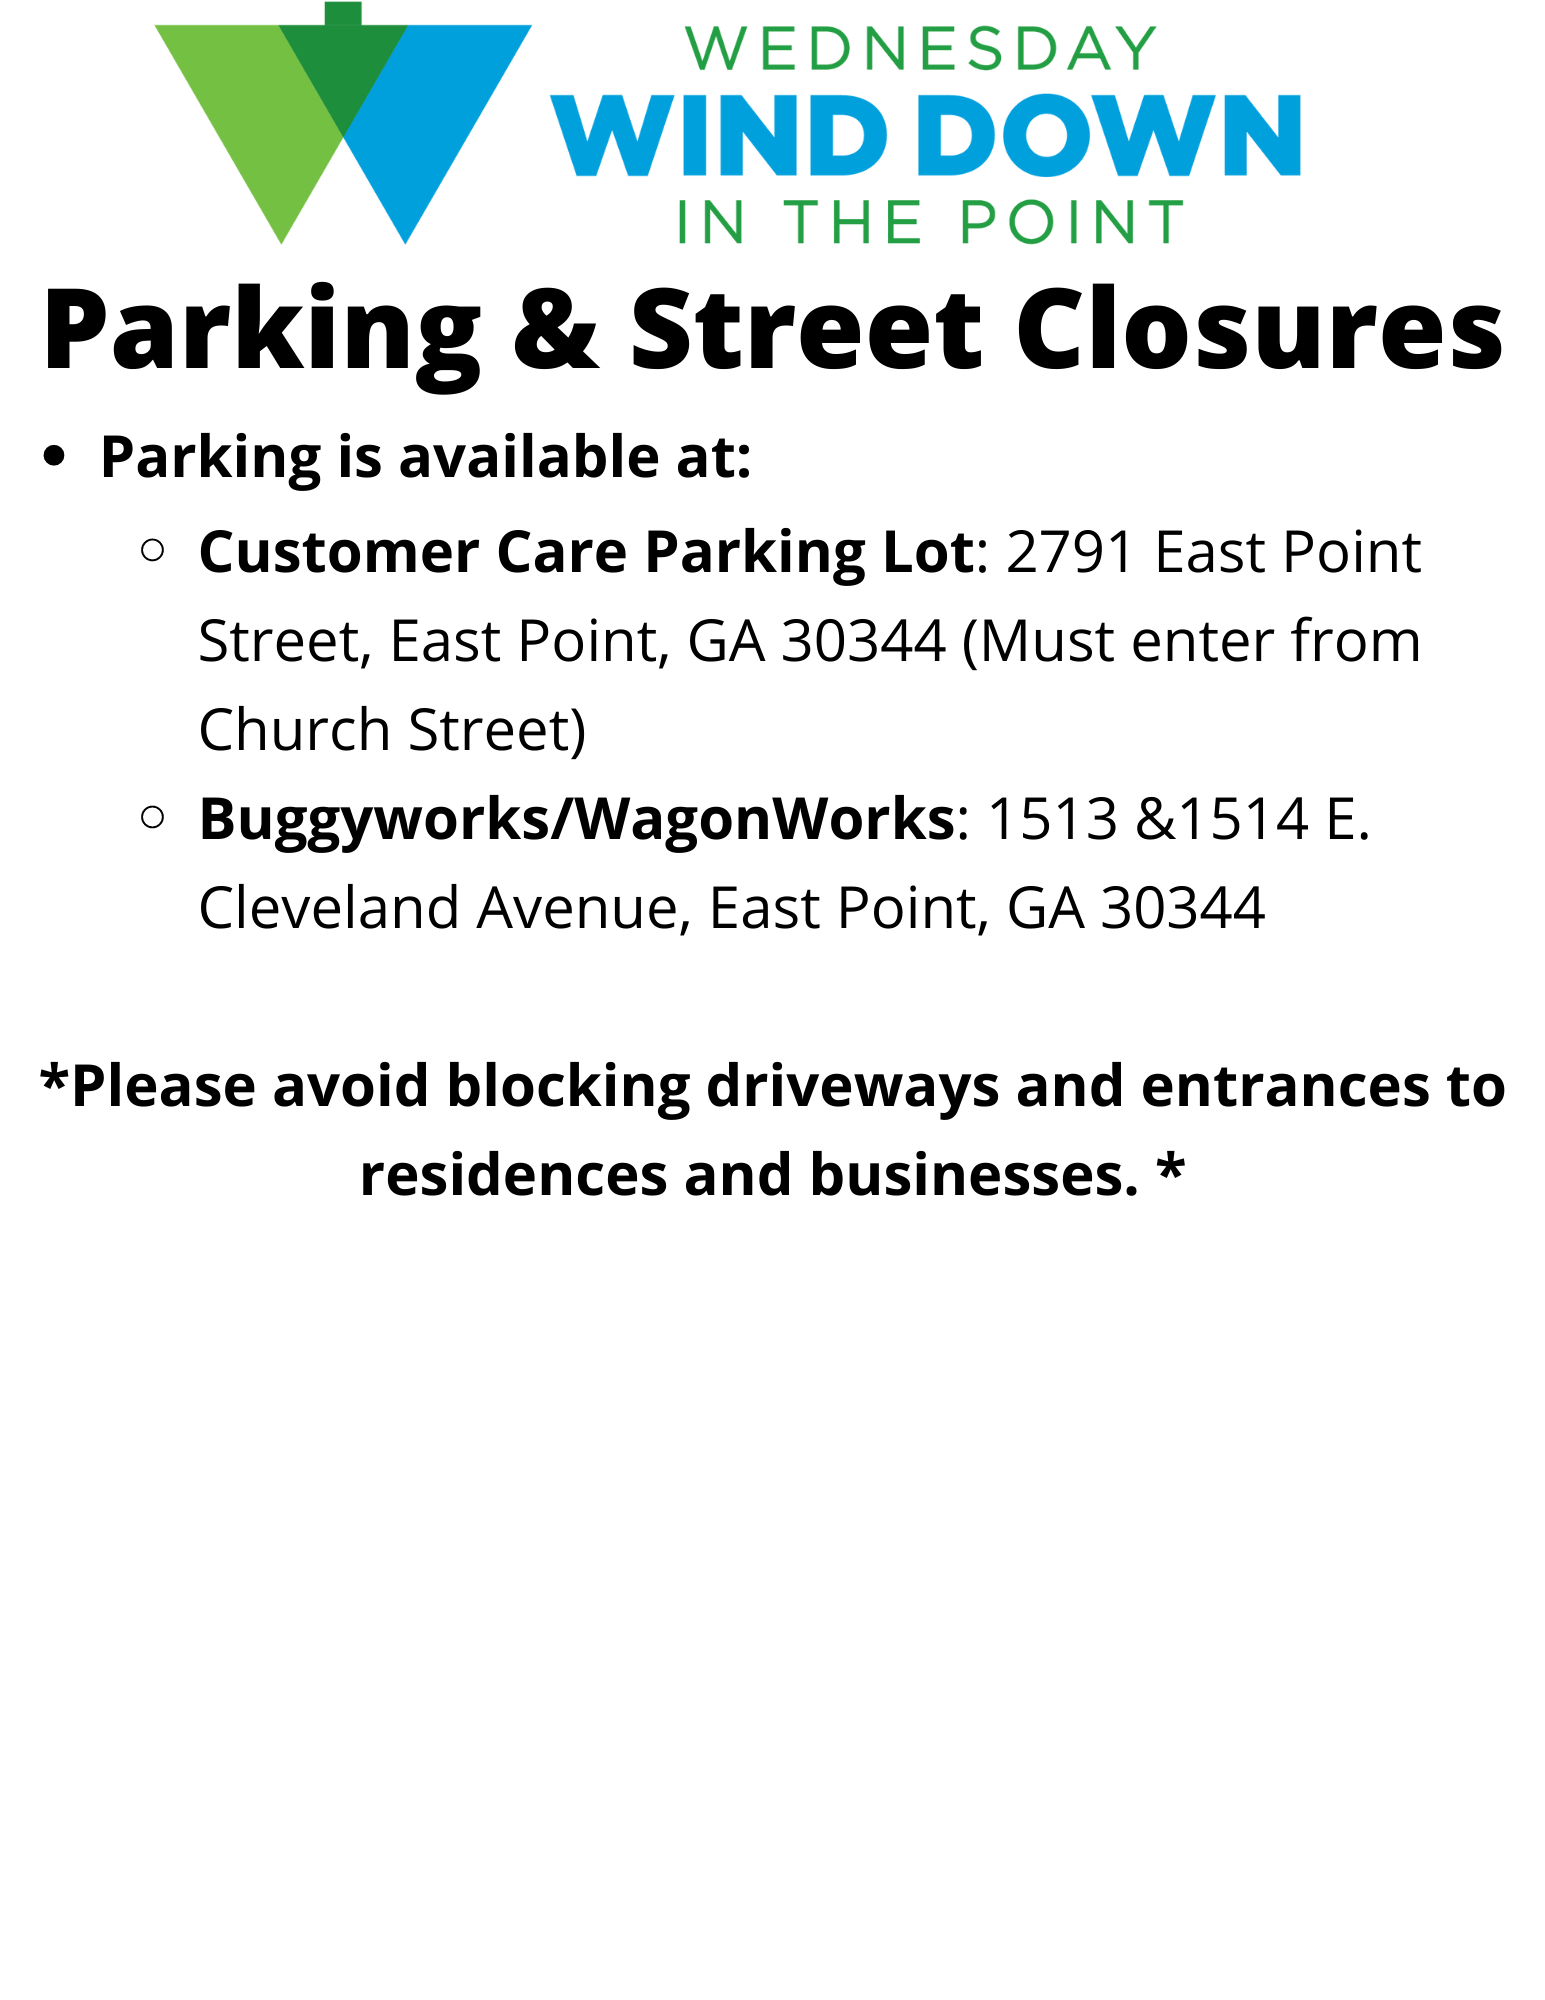 Parking and Street Closures